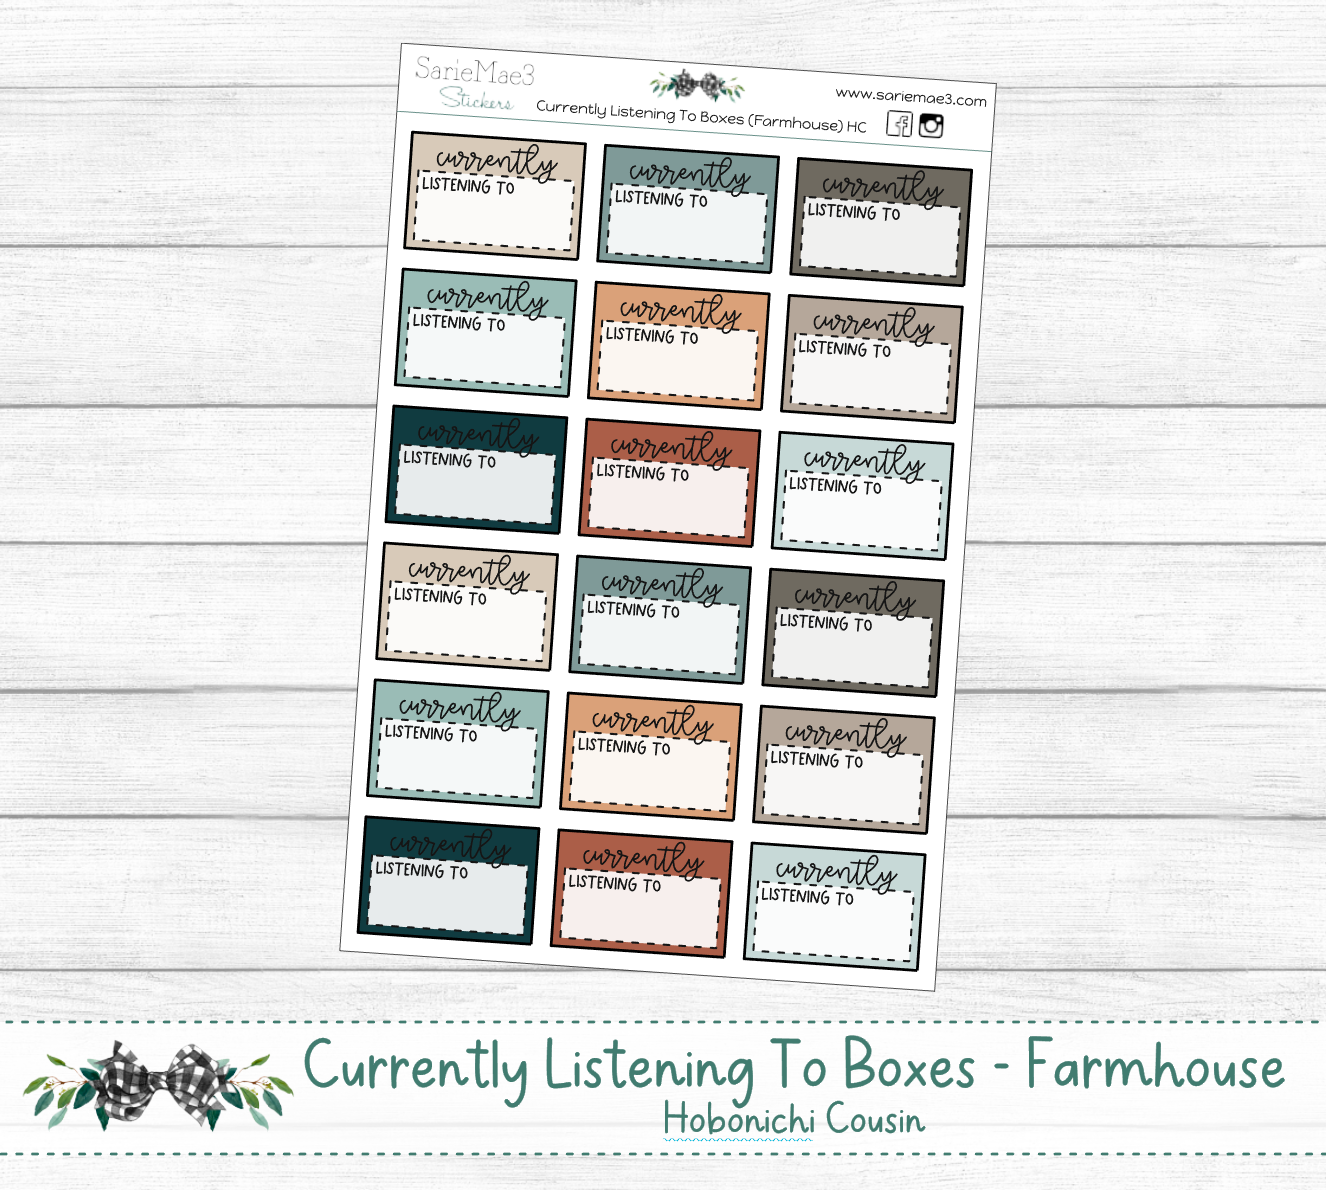 Currently Listening To Boxes (Farmhouse) Hobonichi Cousin